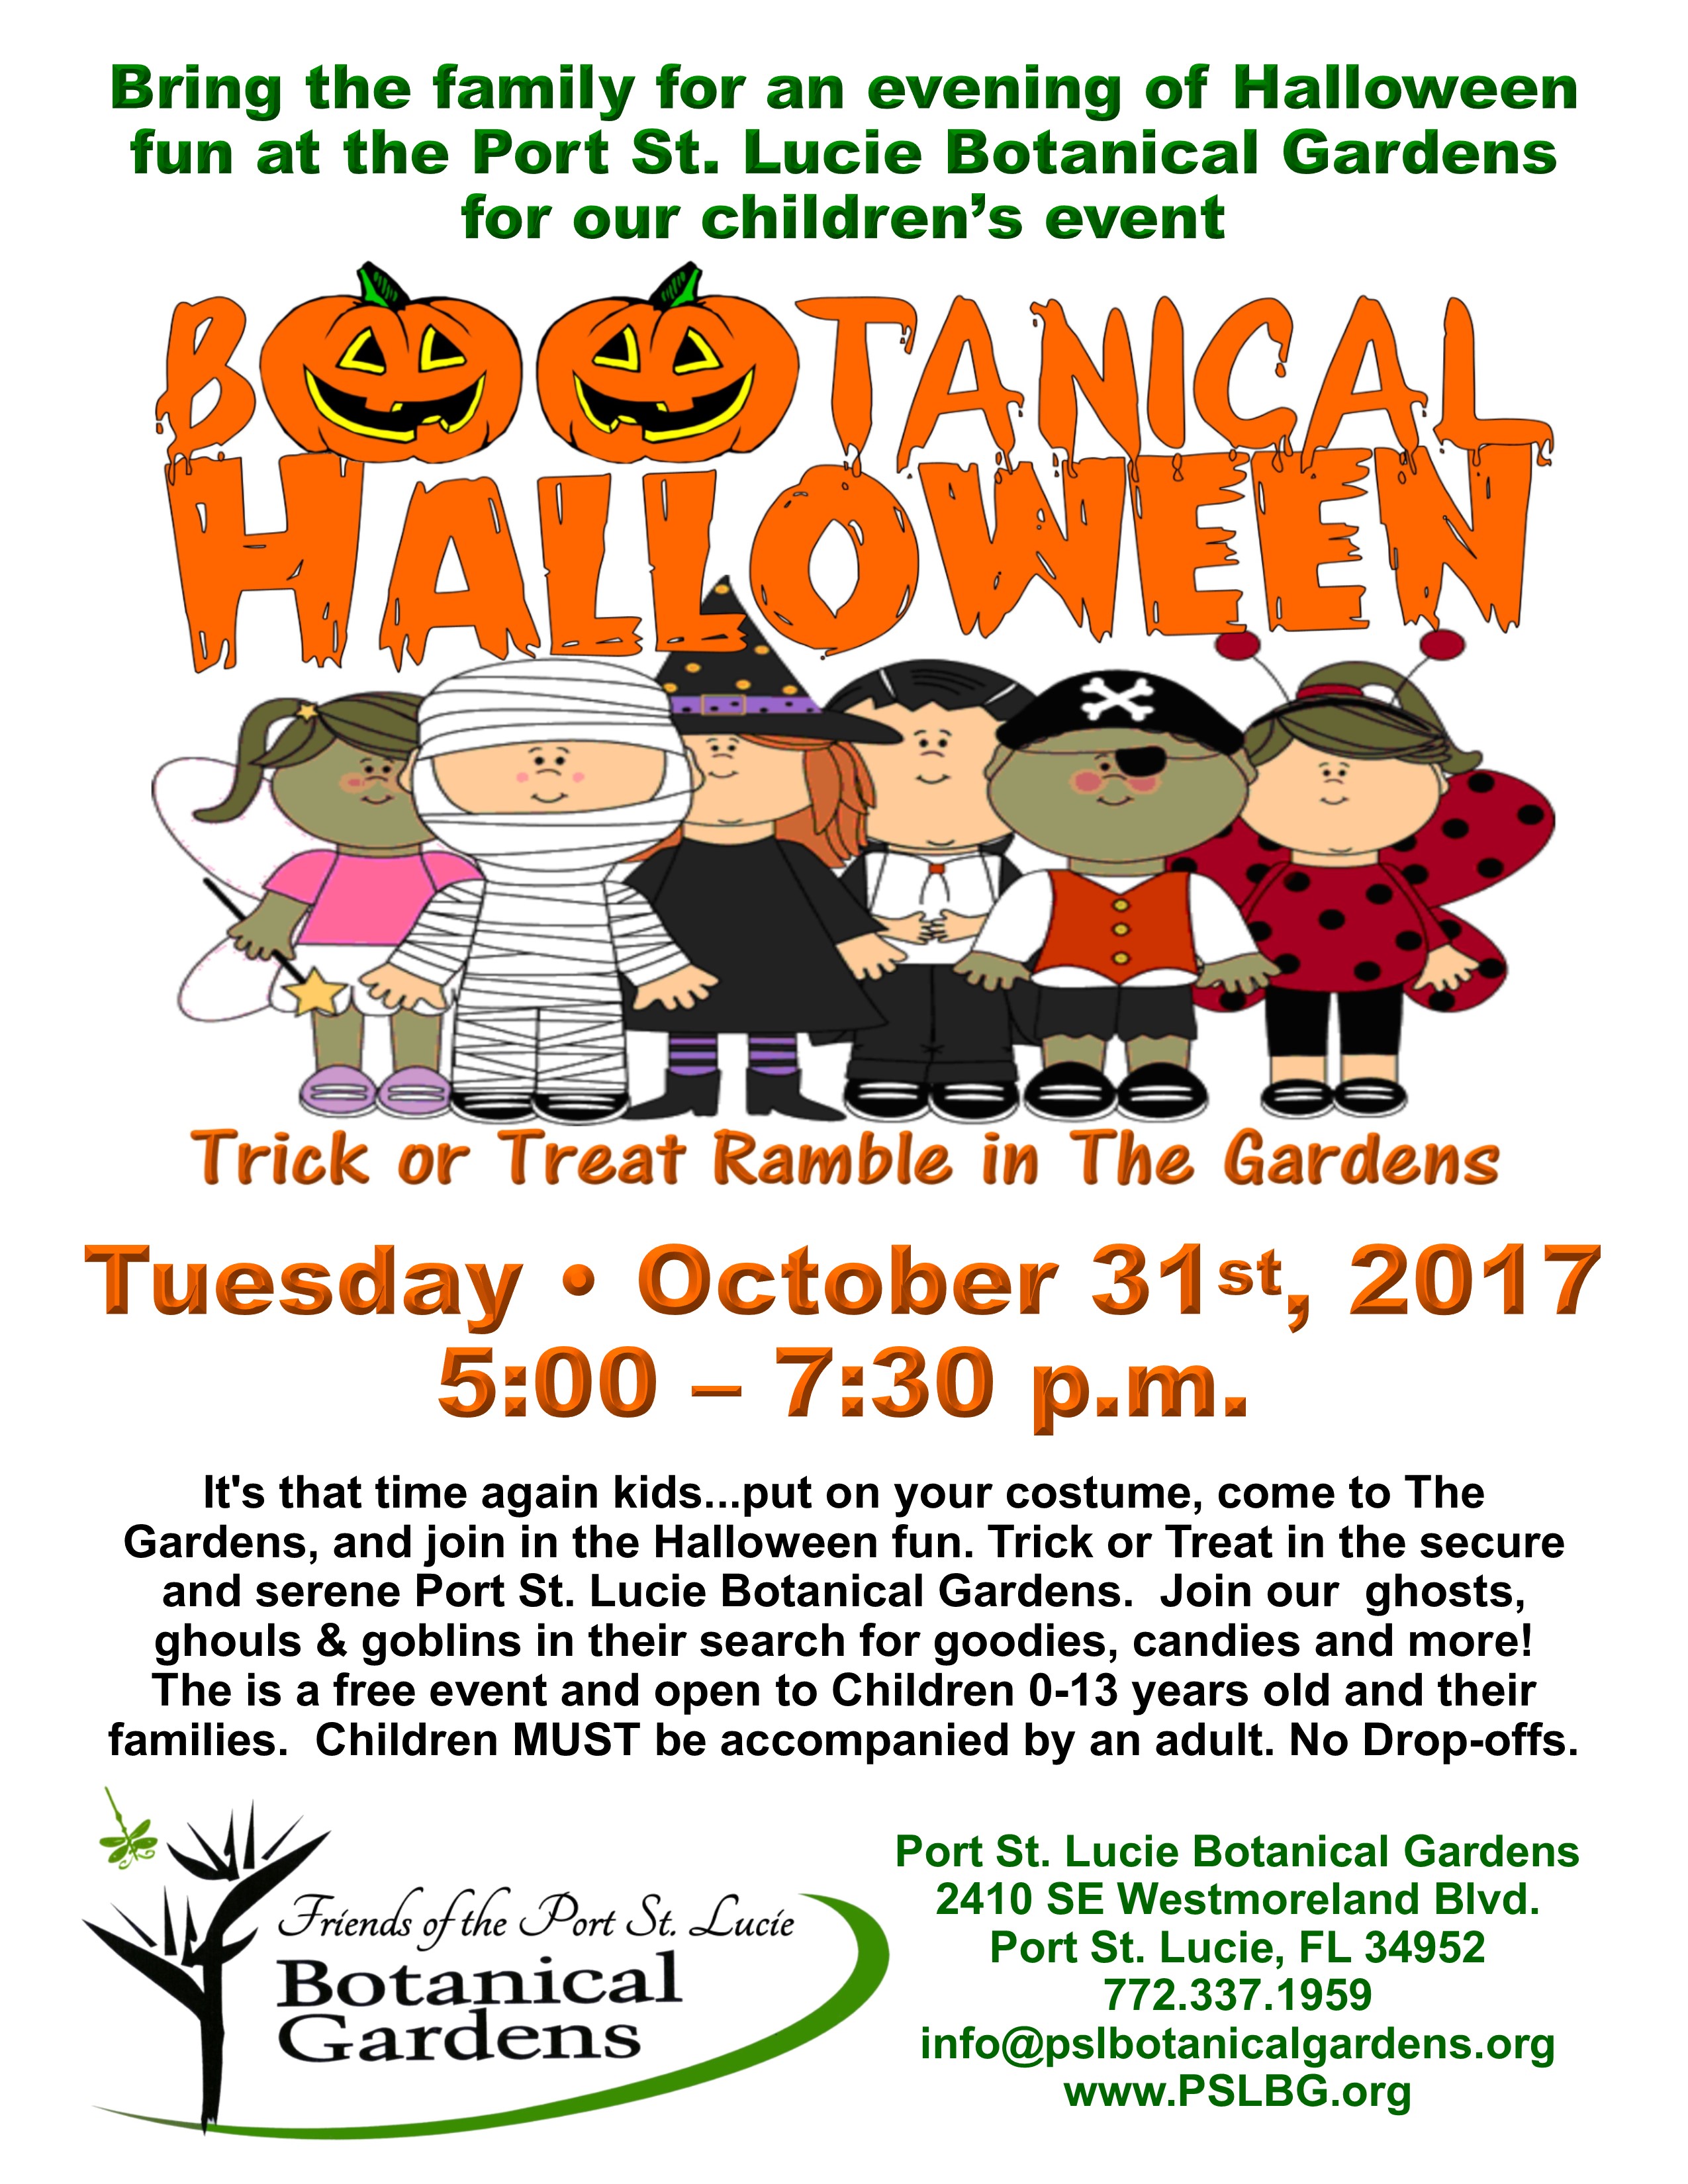 BOOtanical Halloween - Trick or Treat Ramble in The Gardens